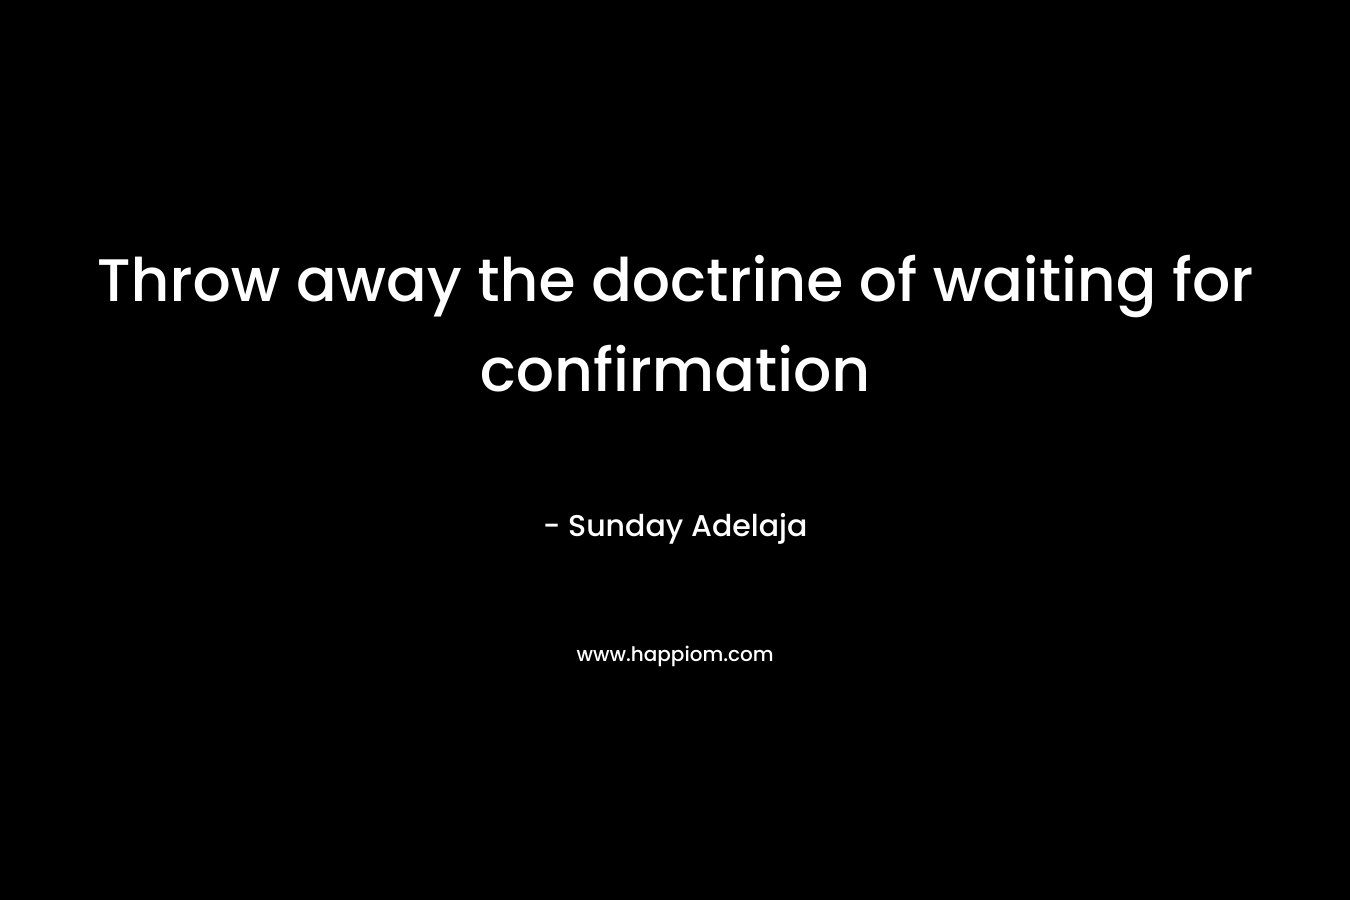 Throw away the doctrine of waiting for confirmation